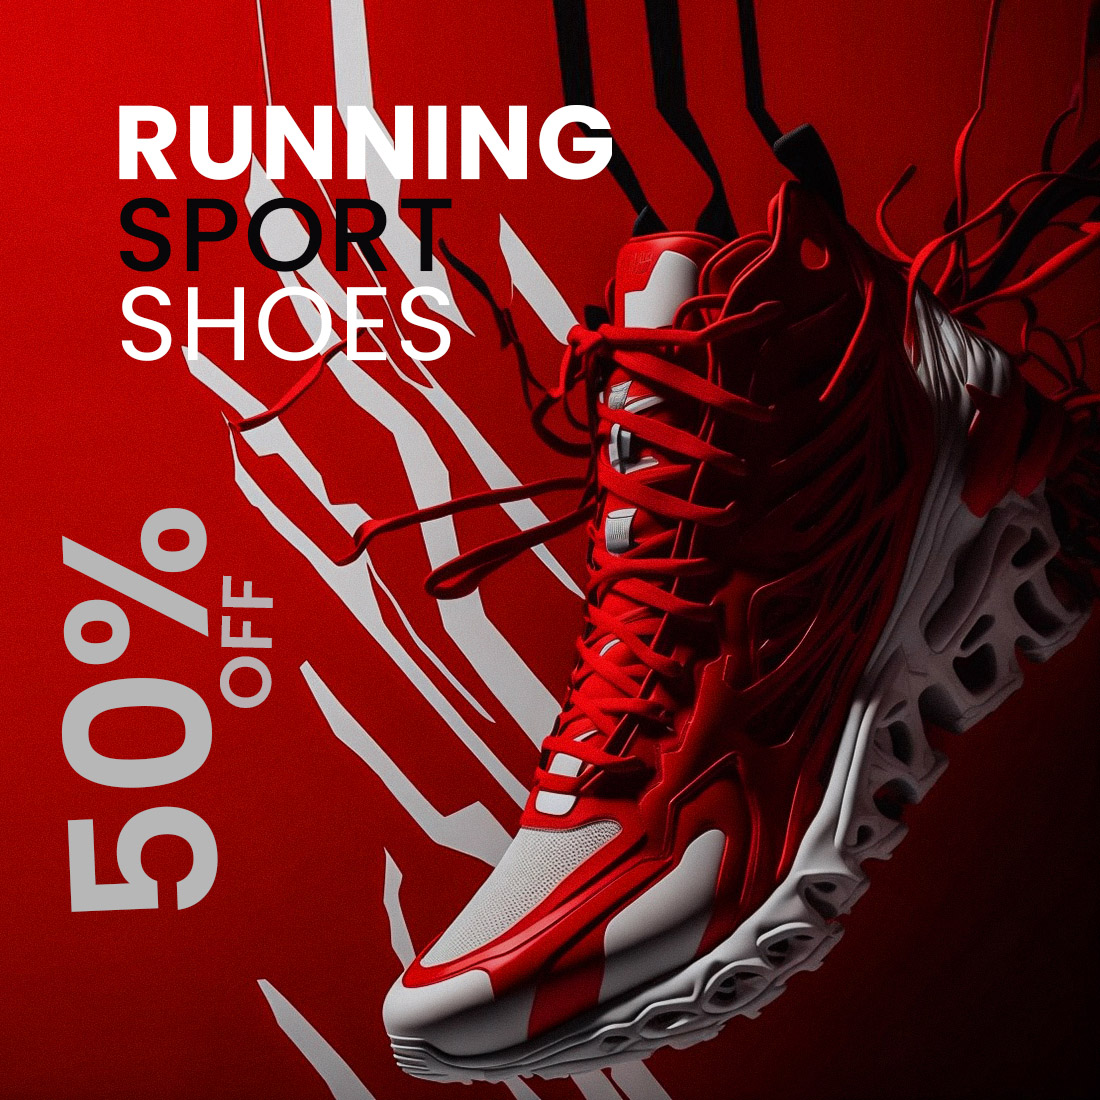 running shoes social media post cover image.